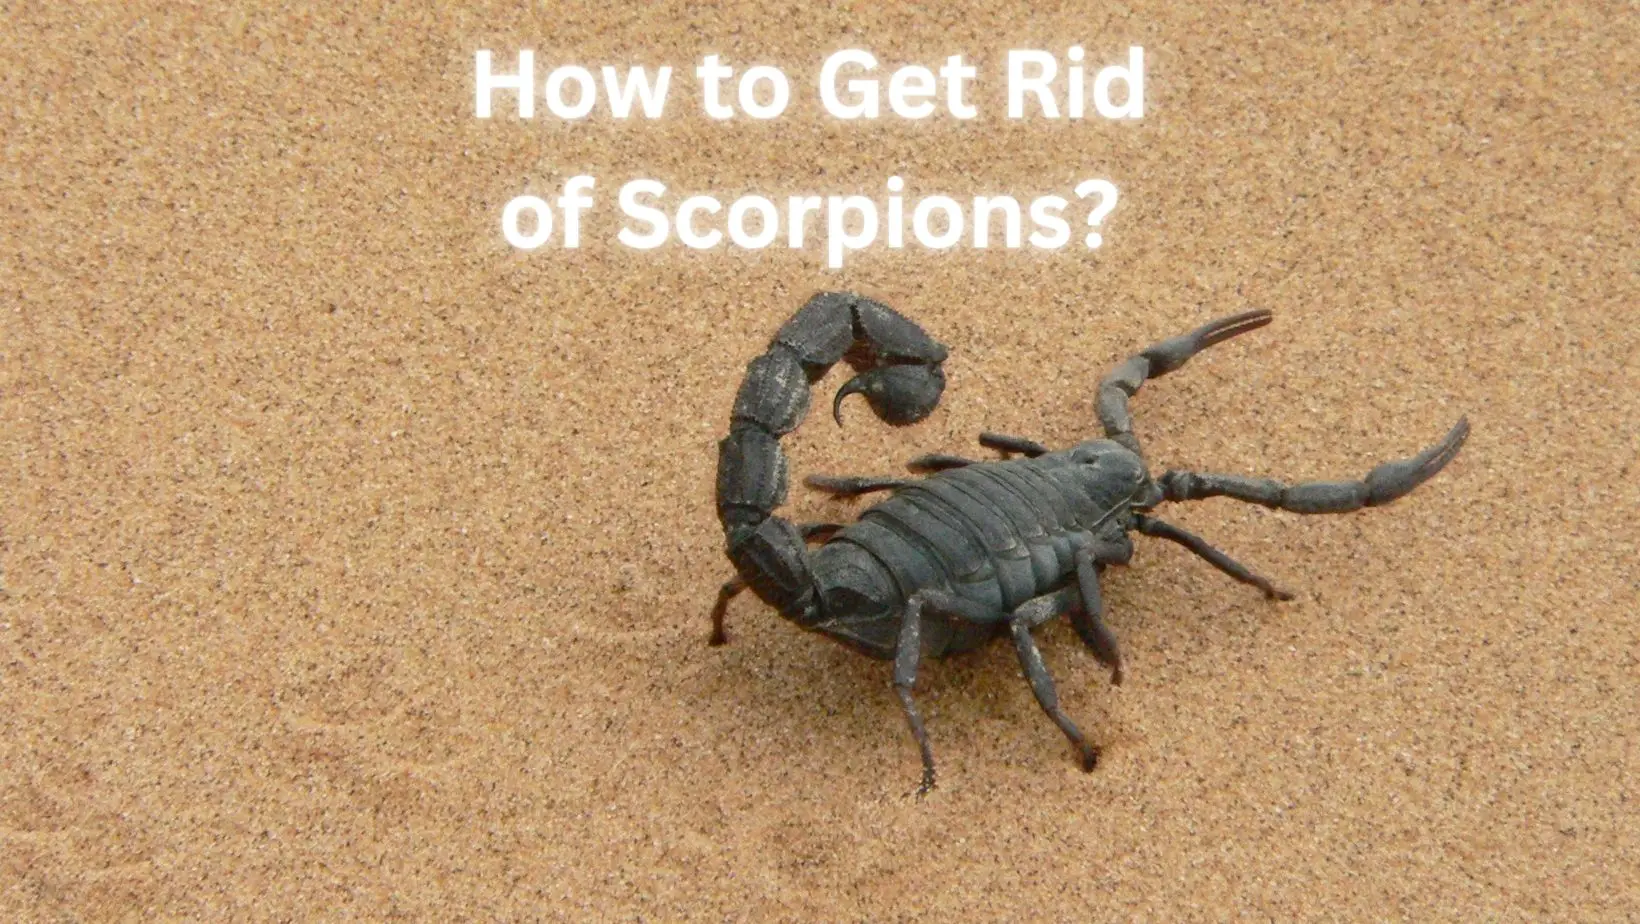 How to Get Rid of Scorpions Humane Ways